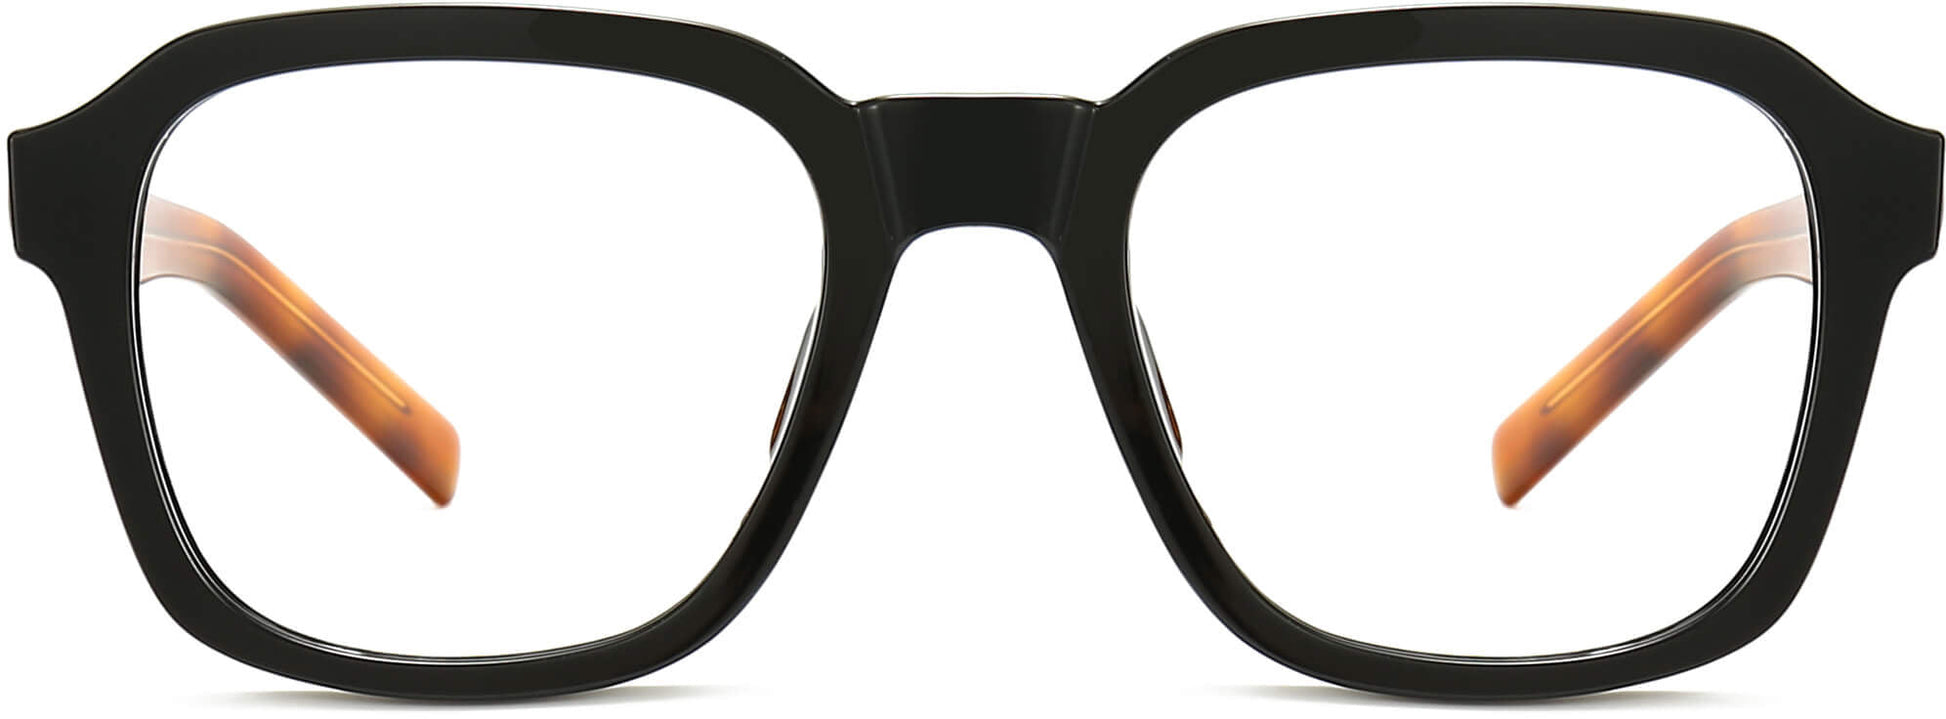 Donald Square Black Eyeglasses from ANRRI, front view